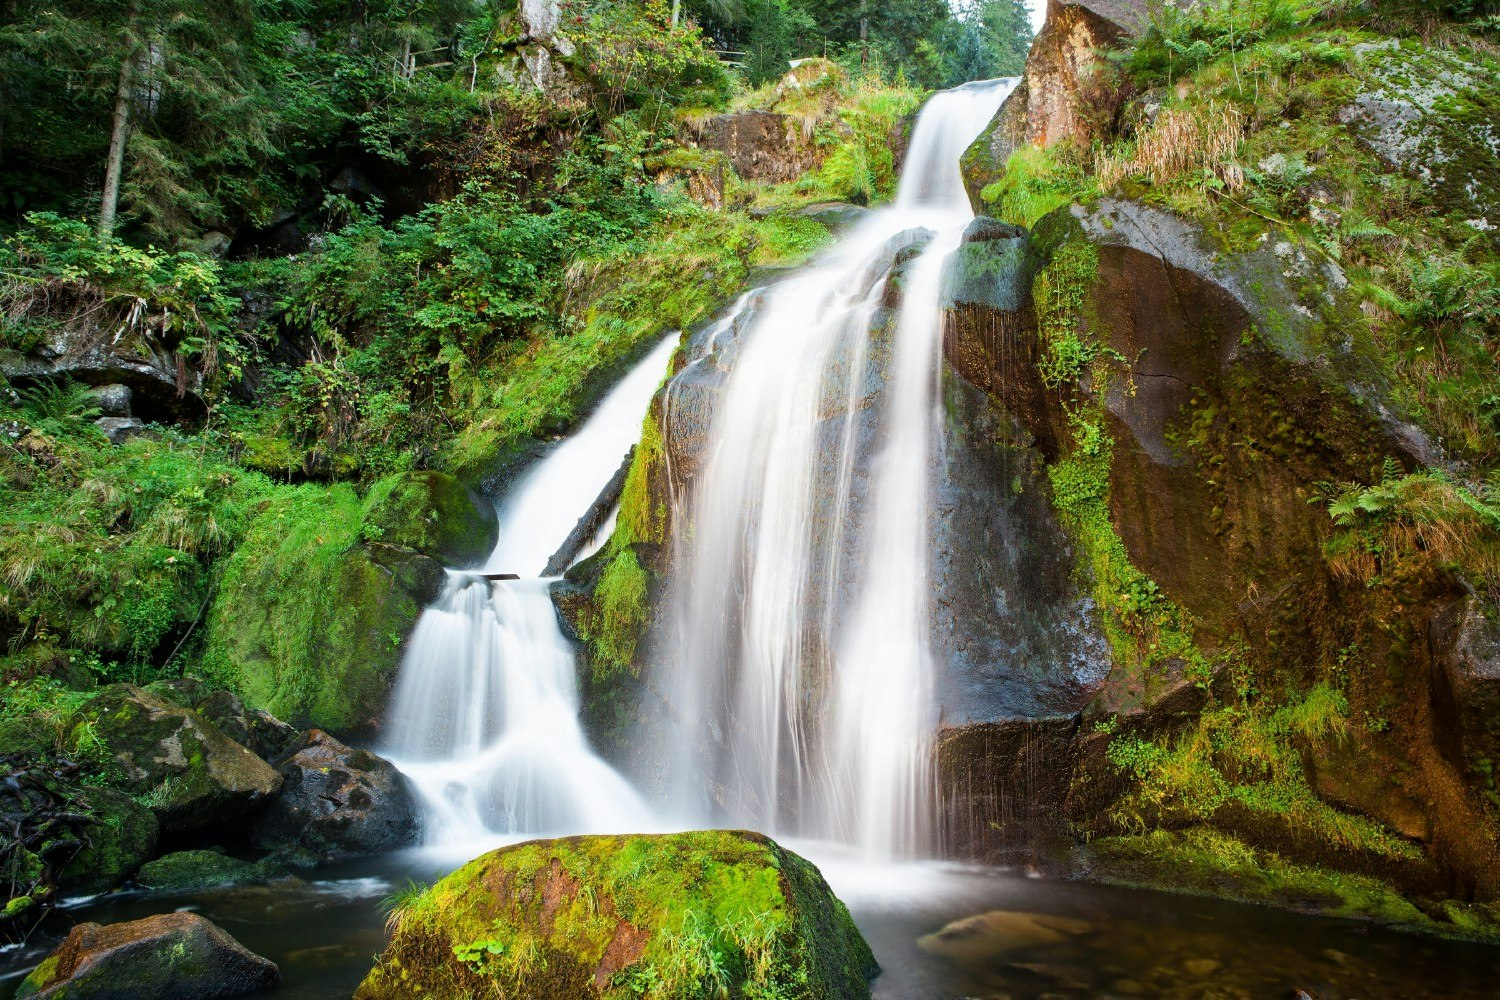 Triberg Falls is one of the highest waterfalls in Germany.